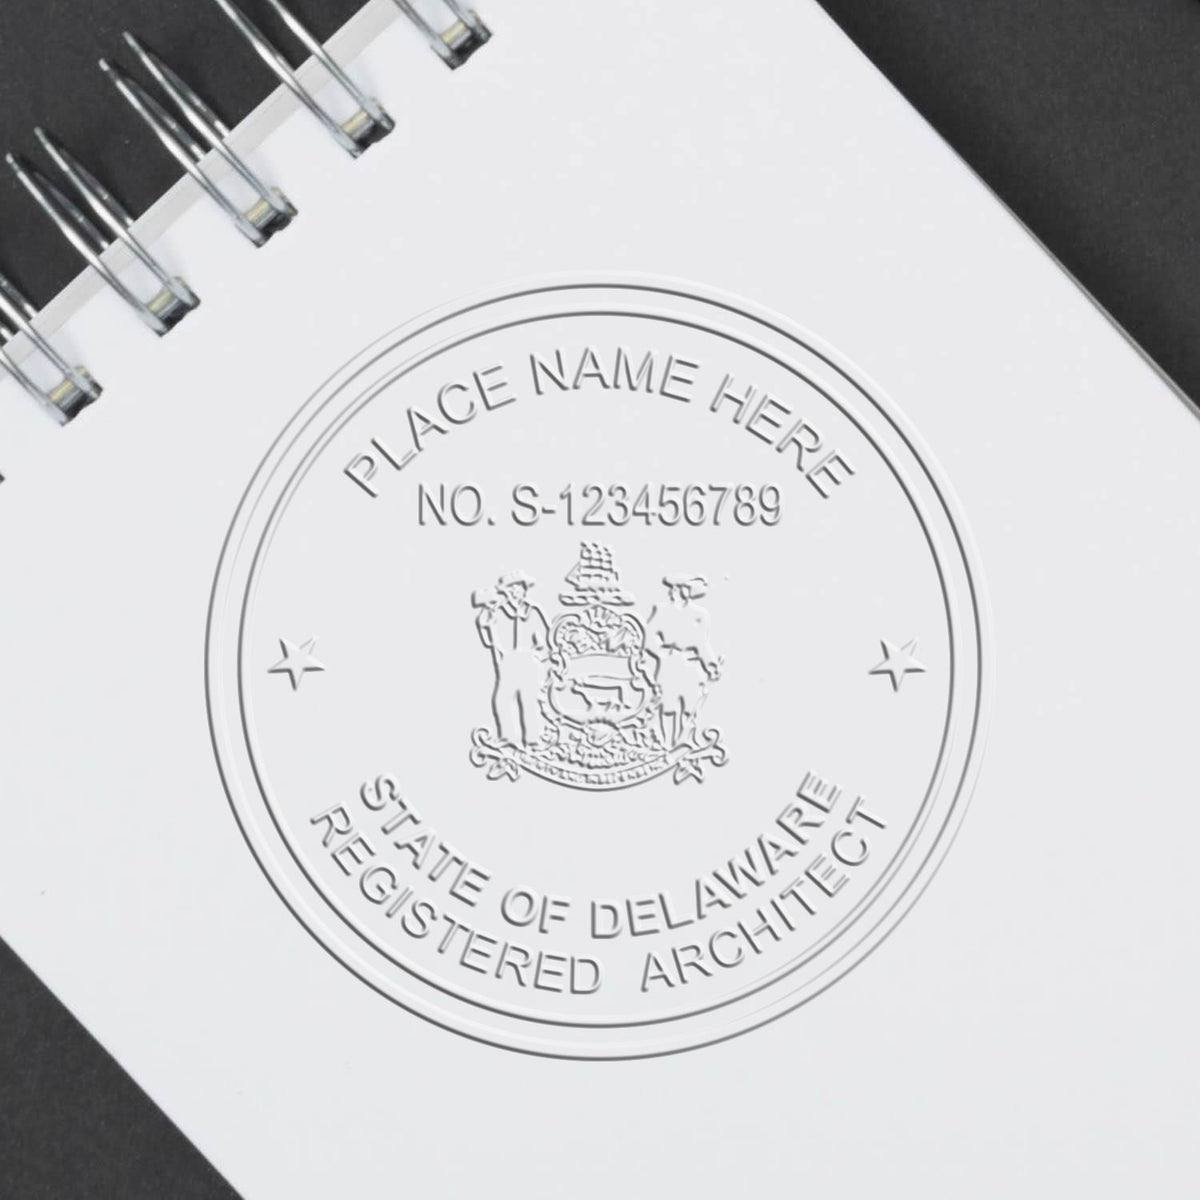 An in use photo of the Hybrid Delaware Architect Seal showing a sample imprint on a cardstock